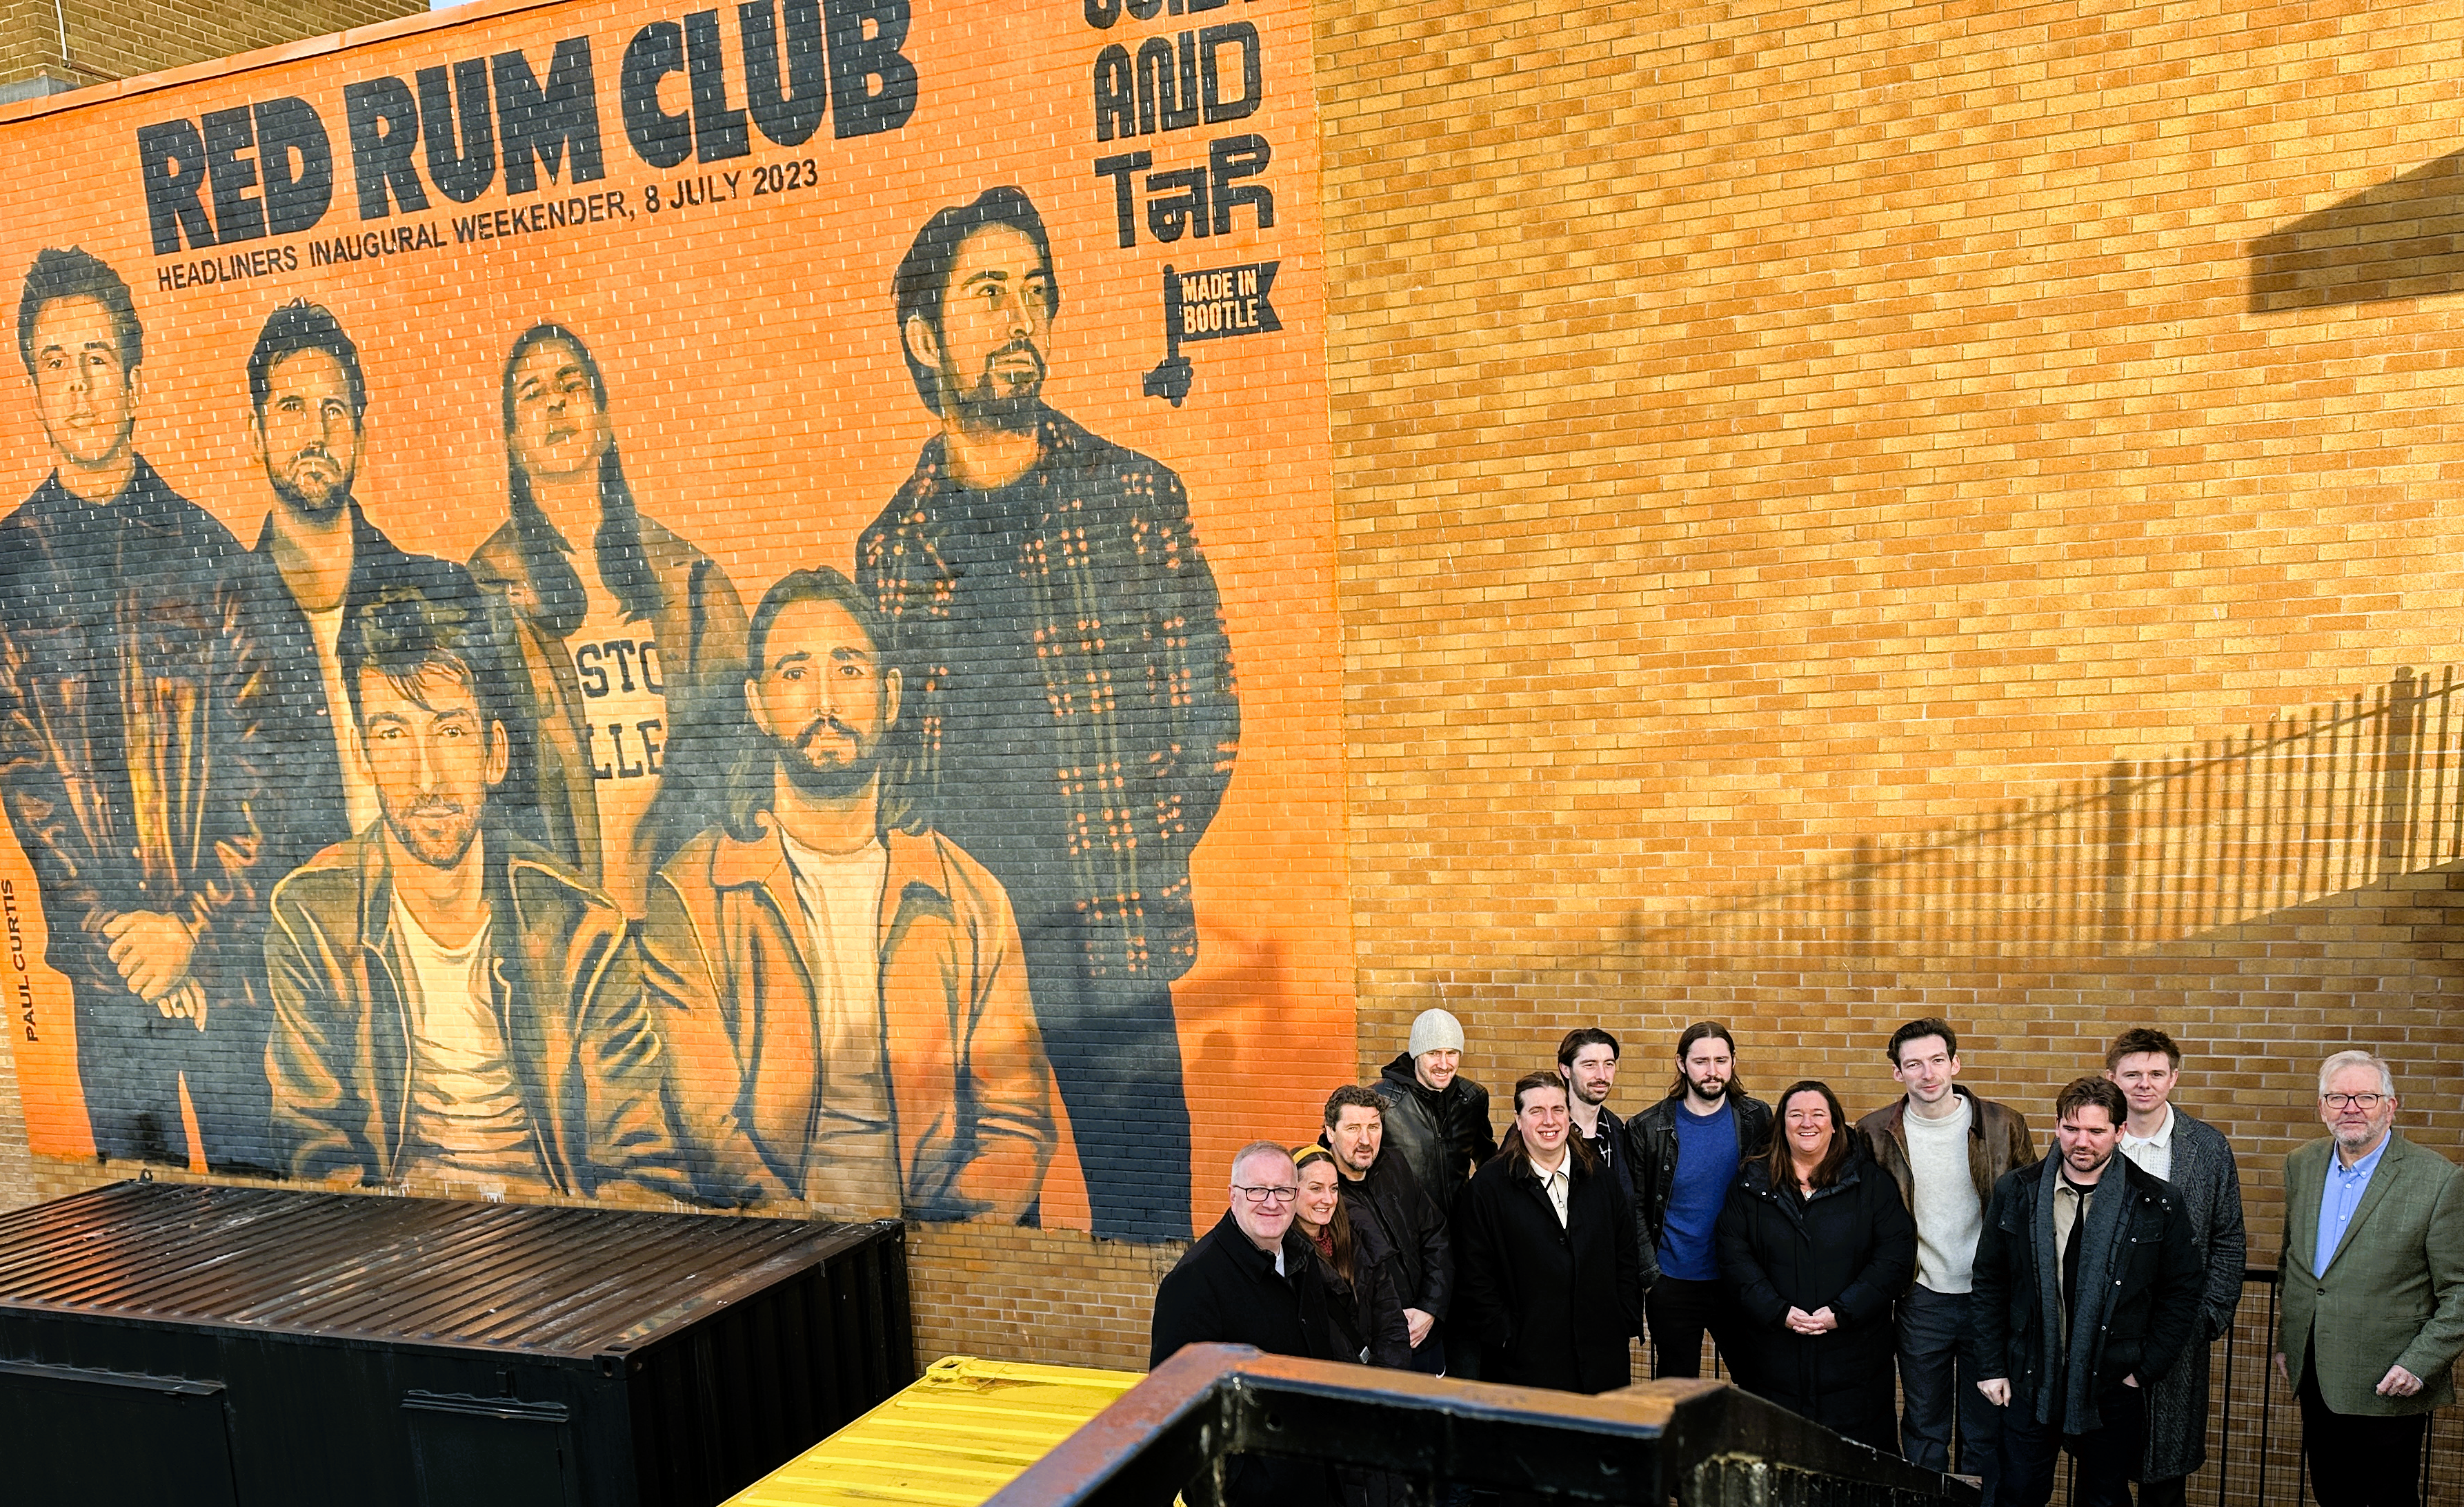 A new mural dedicated to local band Red Rum Club has been unveiled by Sefton Council at its Salt and Tar site in Bootle. It was created by Paul Curtis Artwork. l-r Stuart Barnes, Assistant Director Place, Karen Yates, Senior General Manager of Salt and Tar, George Wilson, Manager for Red Rum Club, Paul Curtis, artist, Jo Corby from RRC, Simon Hepworth from RRC, Neil Lawson from RRC, Cllr Atkinson, Francis Doran RRC, Mike McDermott RRC, Tom Williams RRC, Peter Dowd